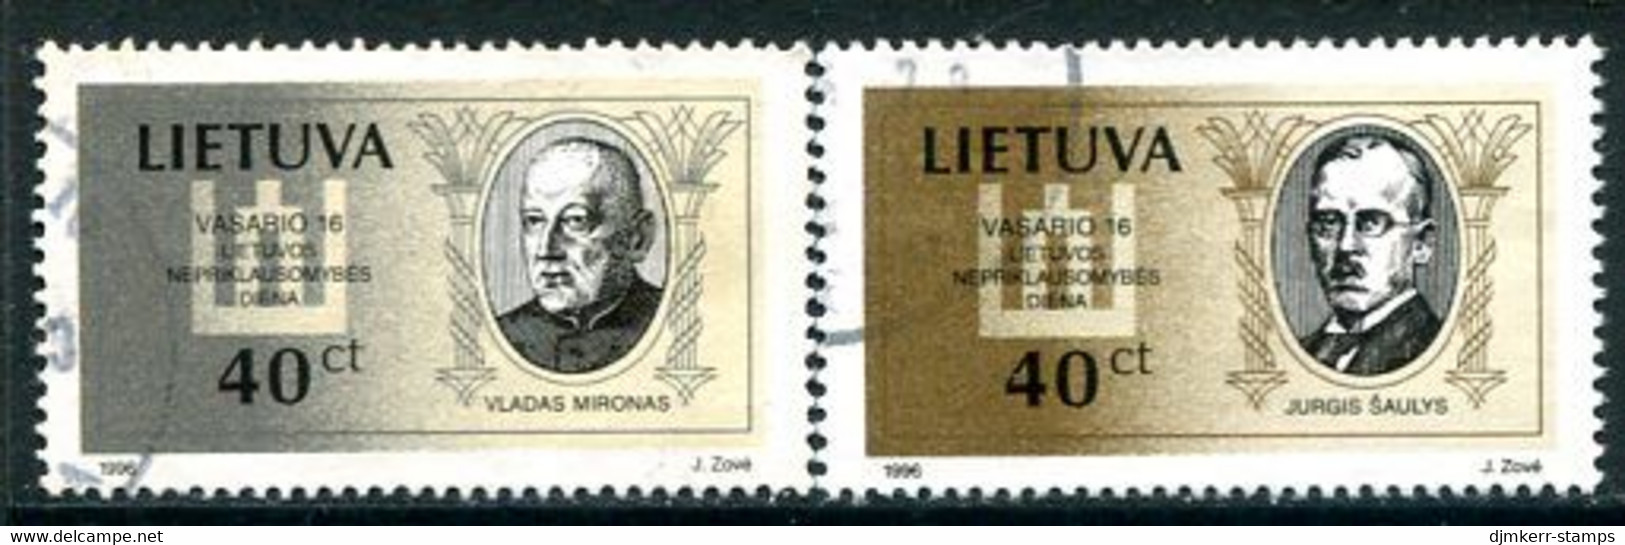 LITHUANIA 1996 Independence Day Used.  Michel 606-07 - Lituanie